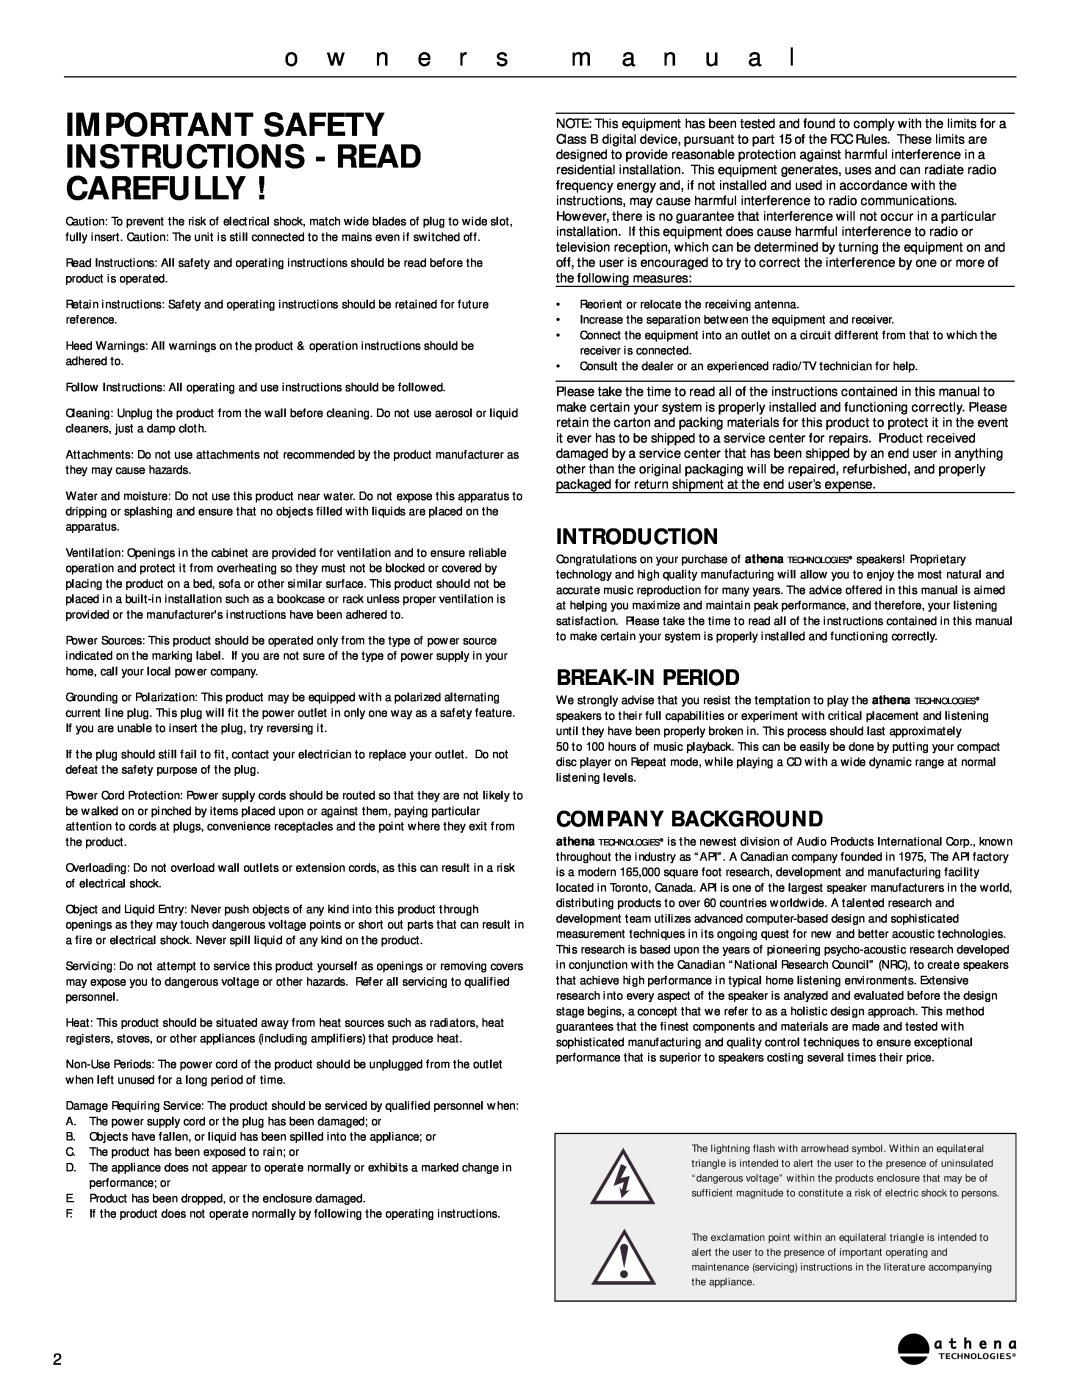 Athena Technologies AS-P400 Important Safety Instructions - Read Carefully, o w n e r s, m a n u a l, Introduction 